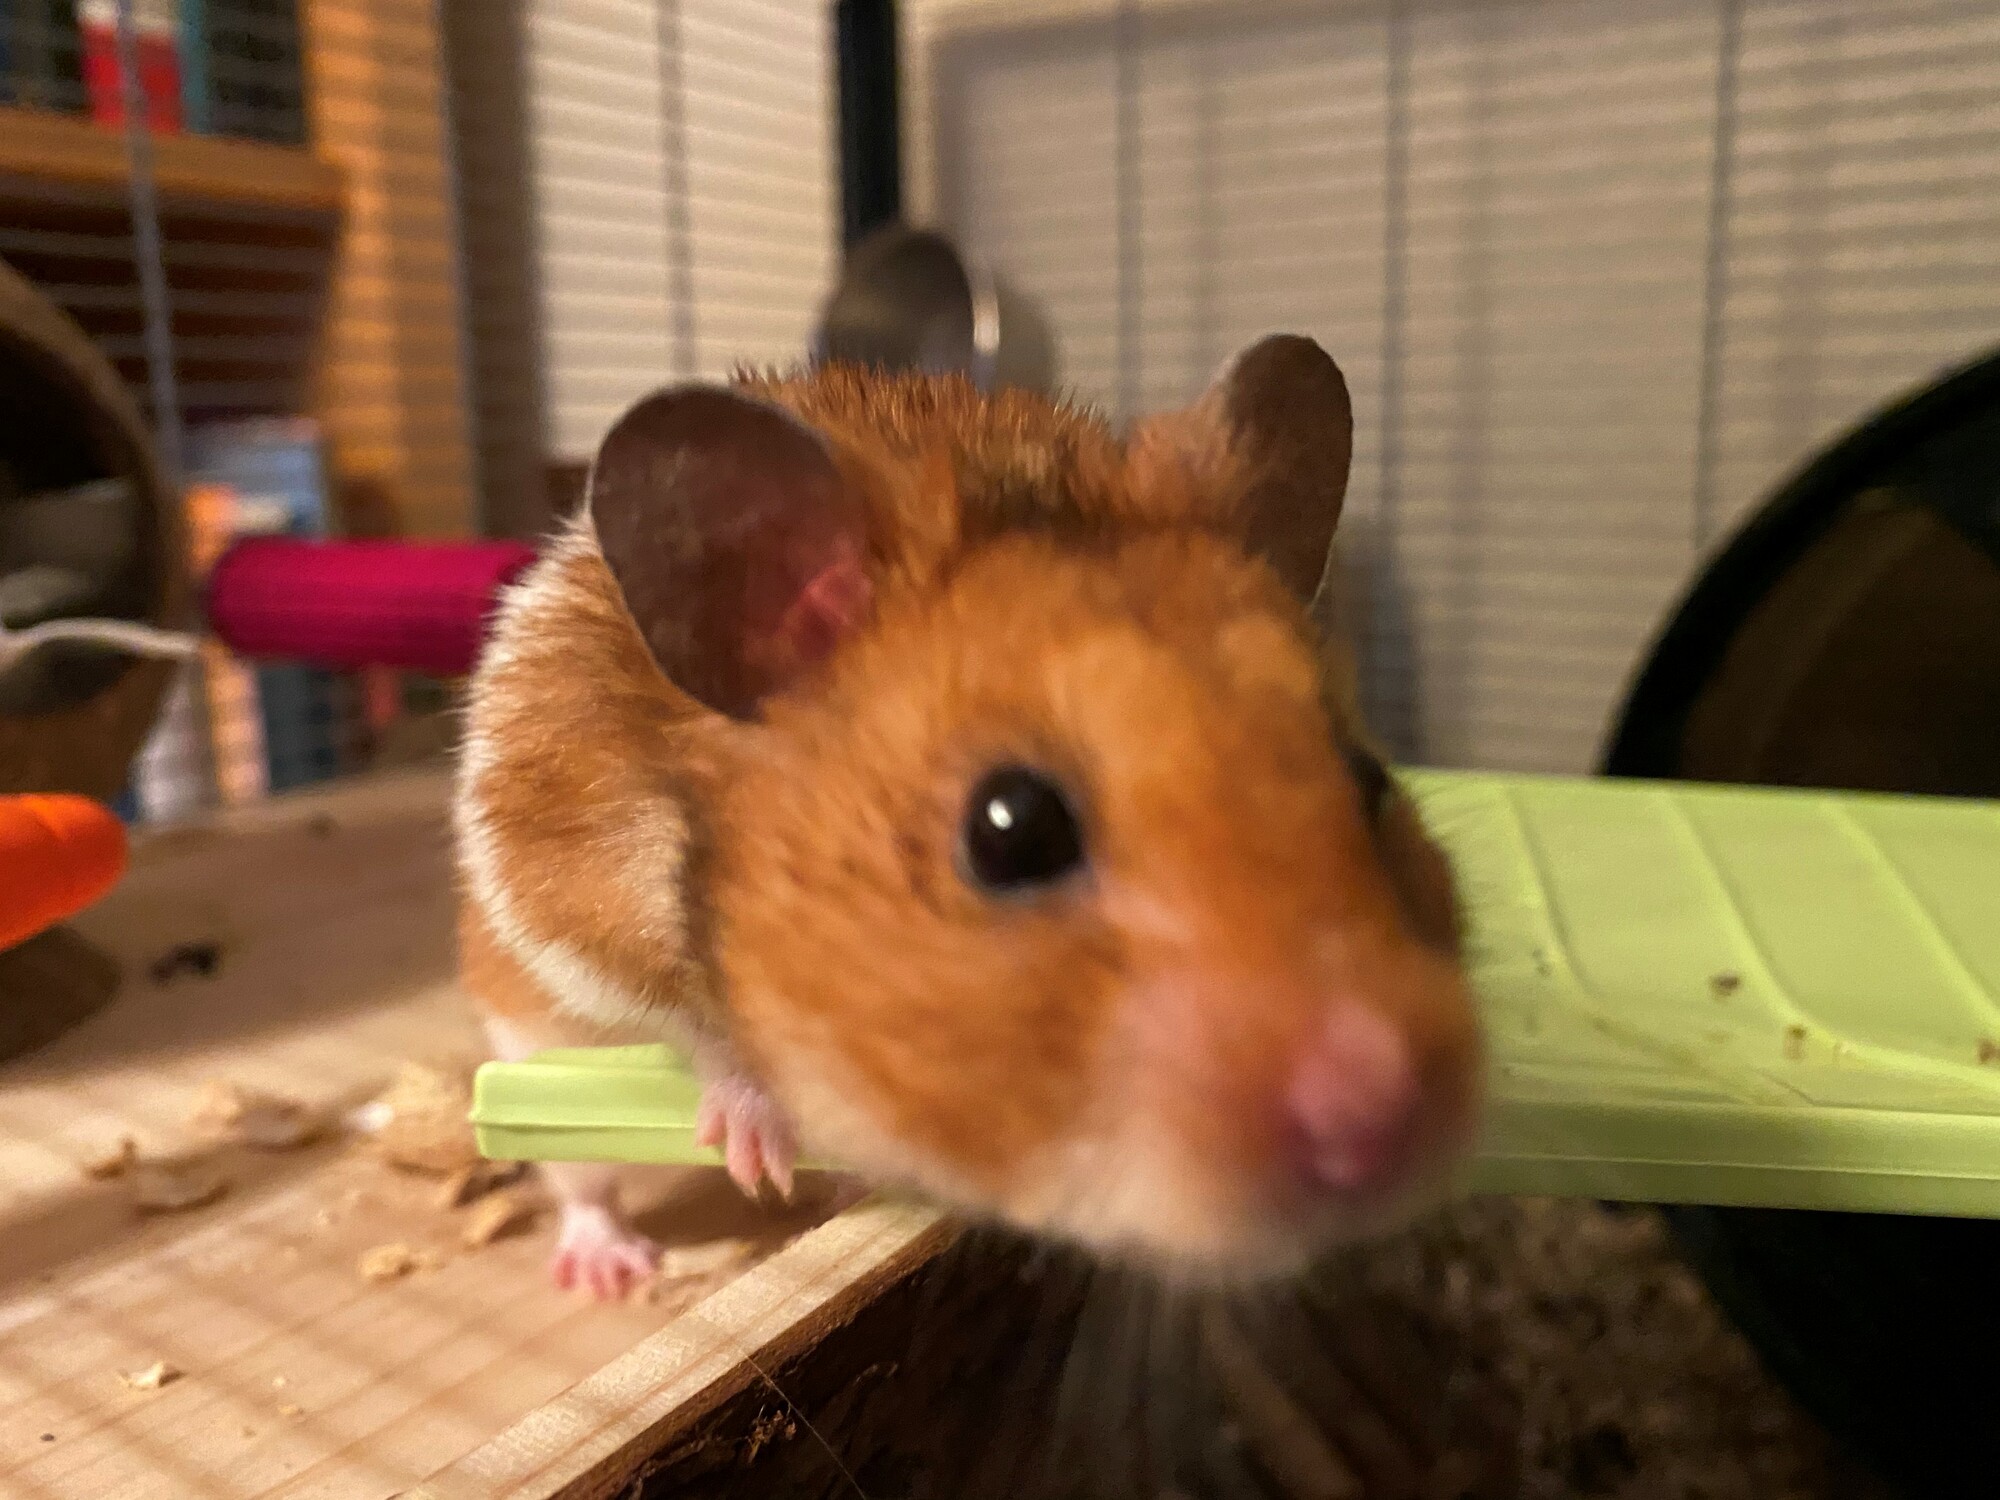 Hamster Bobby enjoying obstacles in his cage